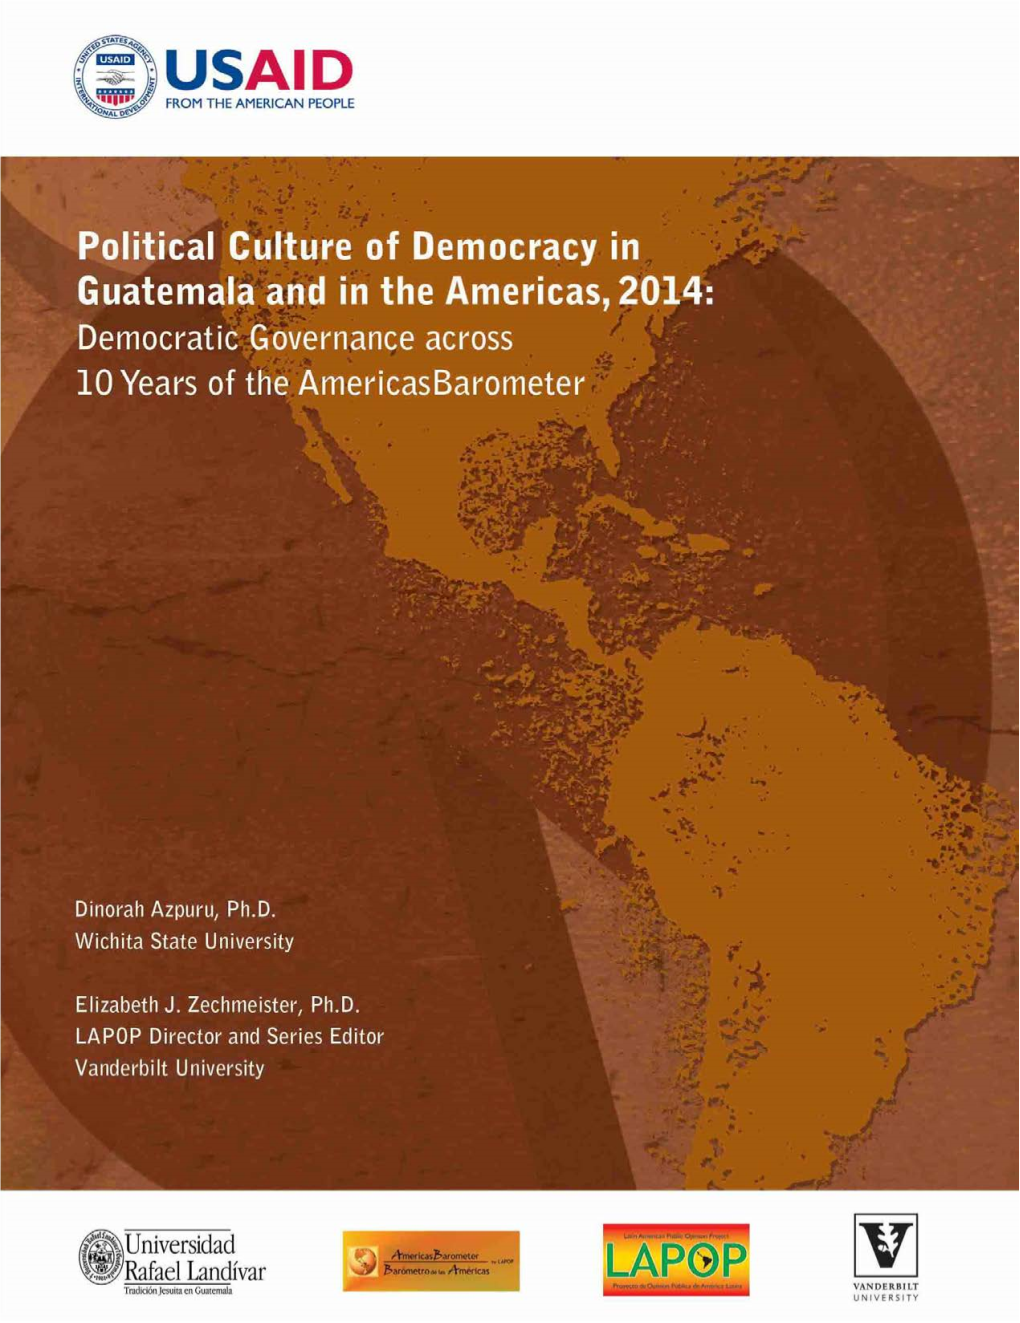 The Political Culture of Democracy in Guatemala and in the Americas, 2014